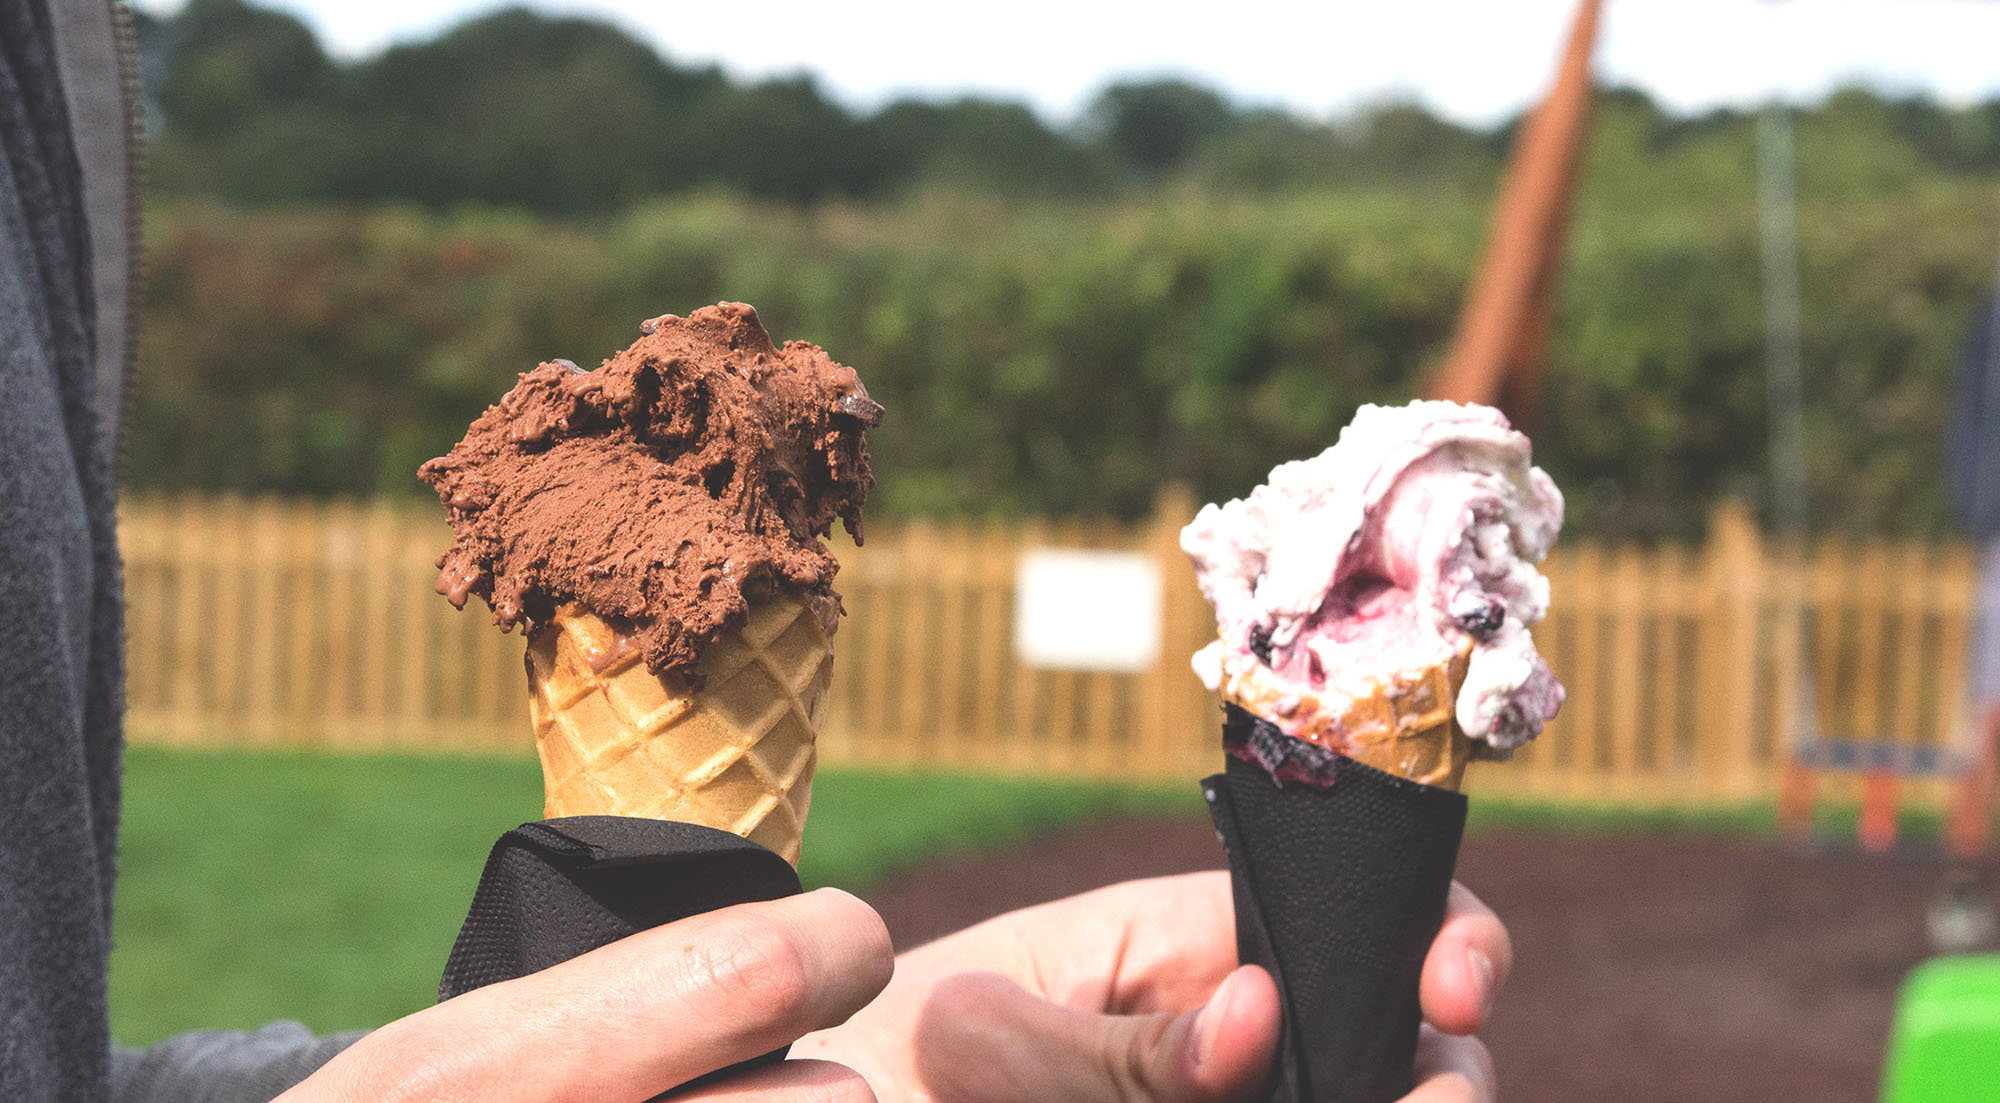 Image of two ice creams taken during the photography process for the Milk Churn website.